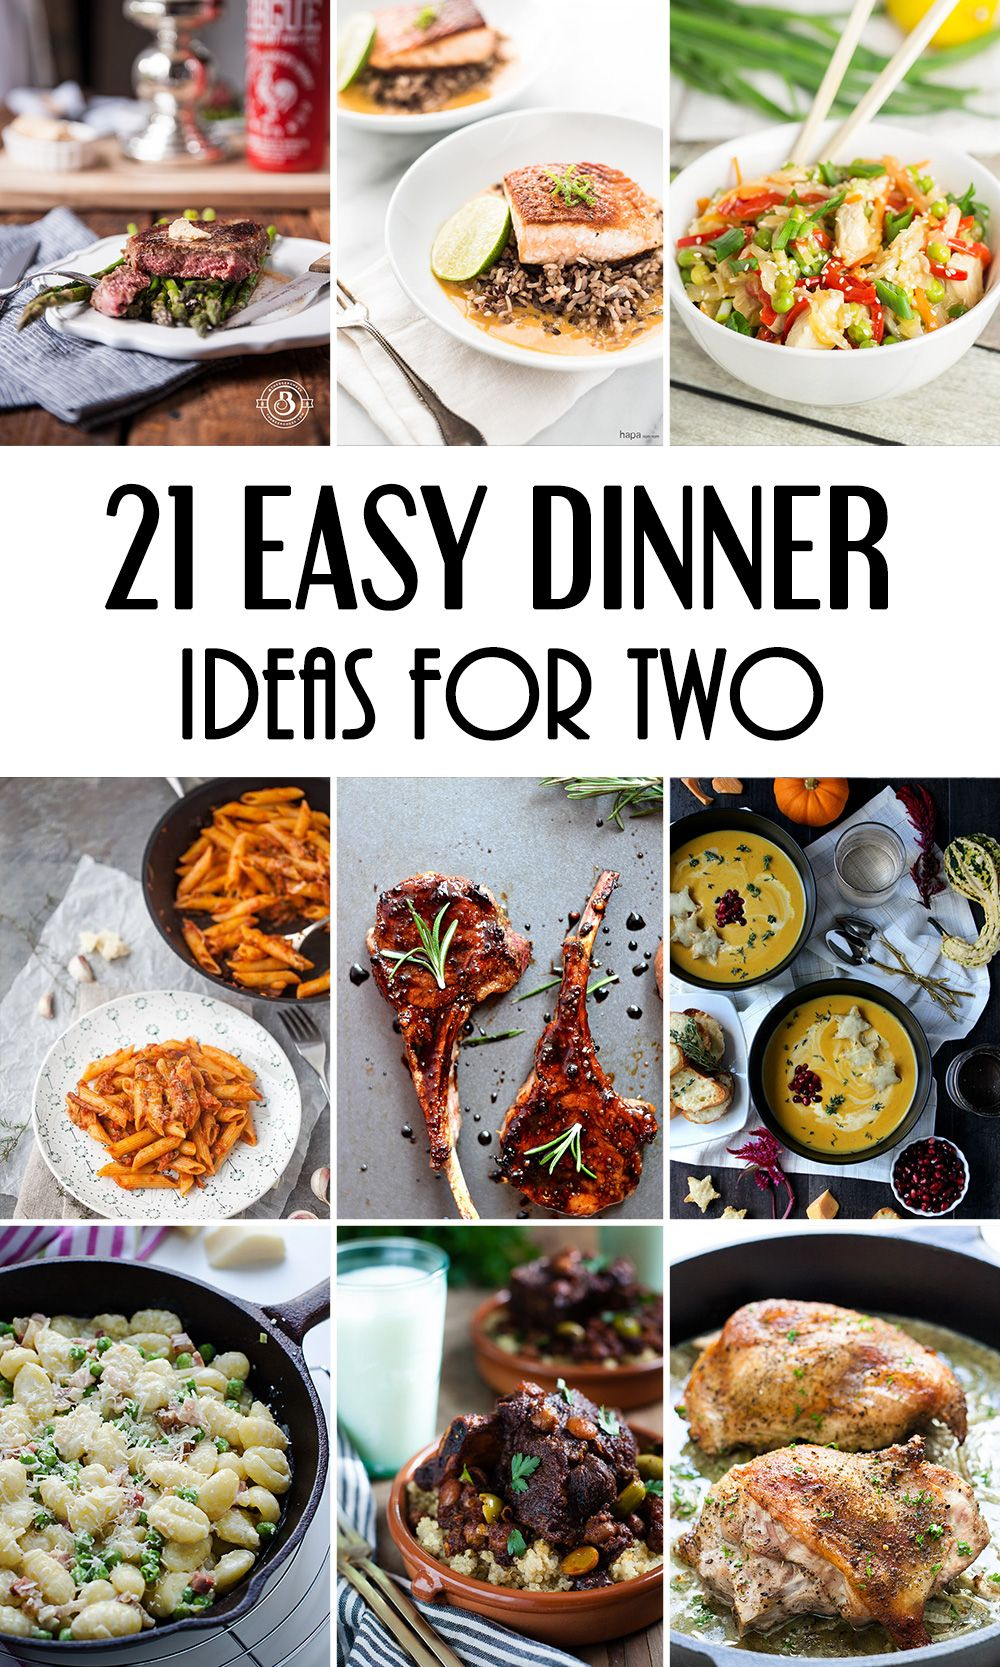 21 Easy Dinner Ideas For Two That Will Impress Your Loved One Food 